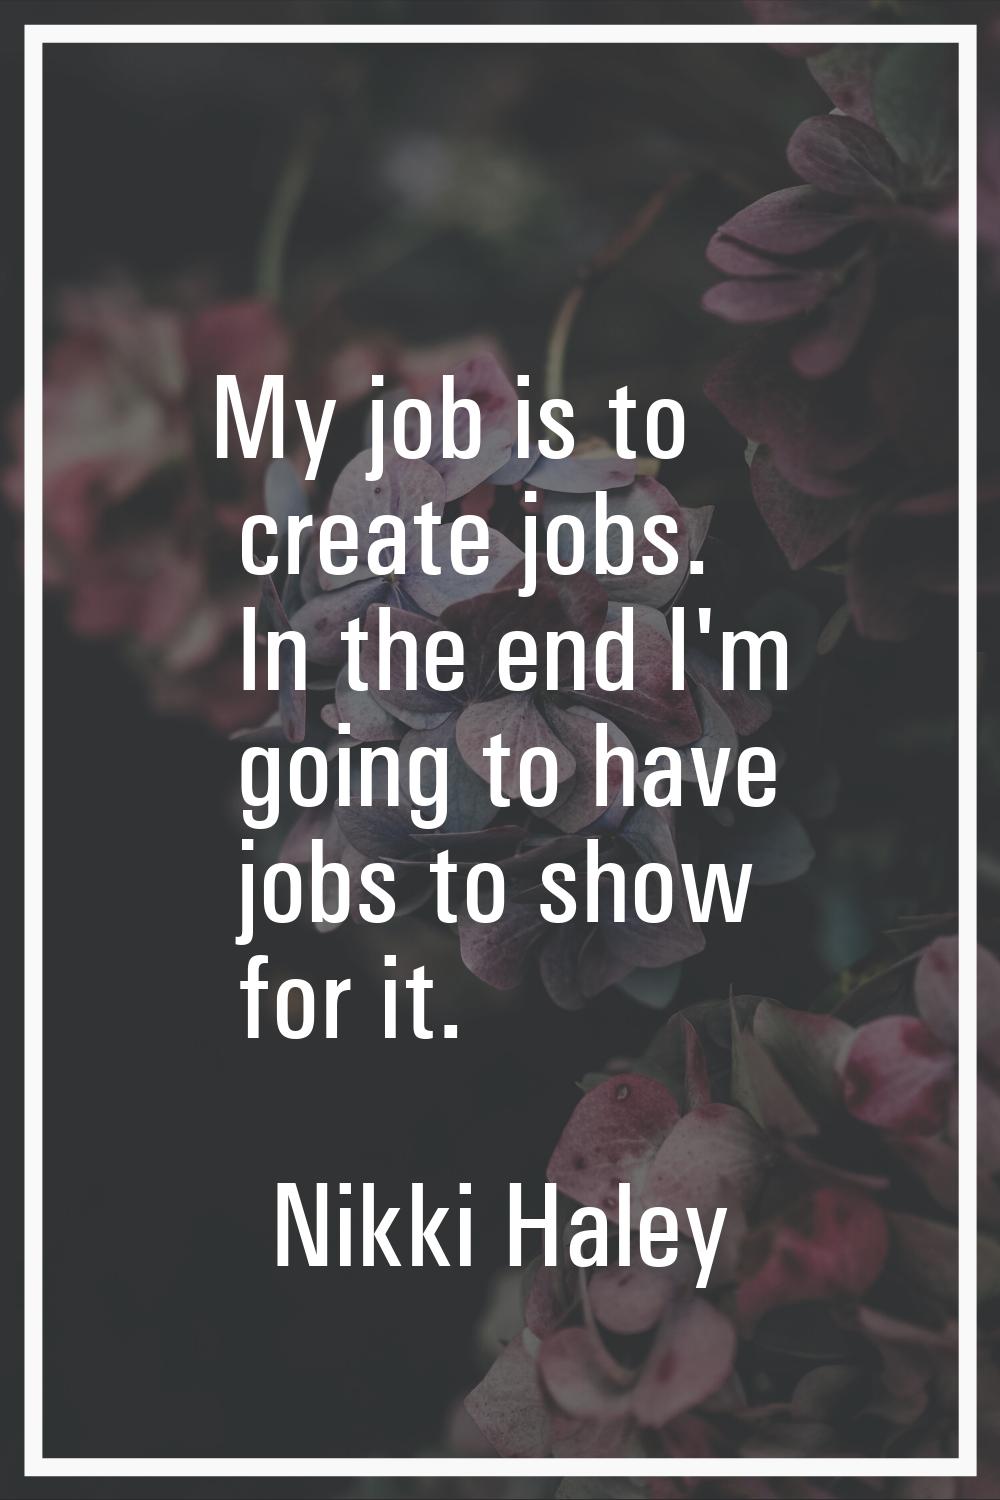 My job is to create jobs. In the end I'm going to have jobs to show for it.